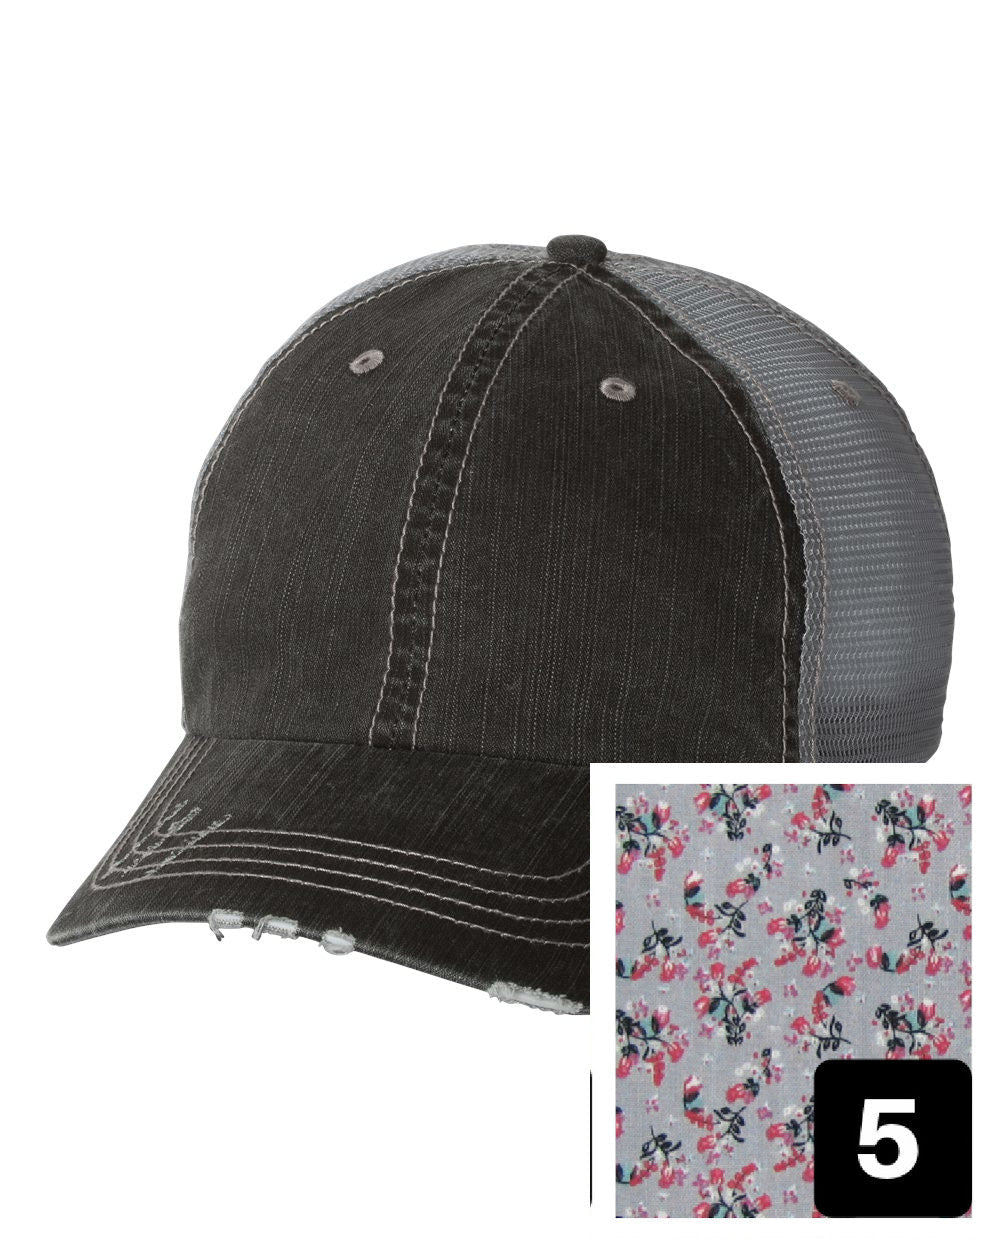 gray distressed trucker hat with purple and pink floral fabric state of Pennsylvania